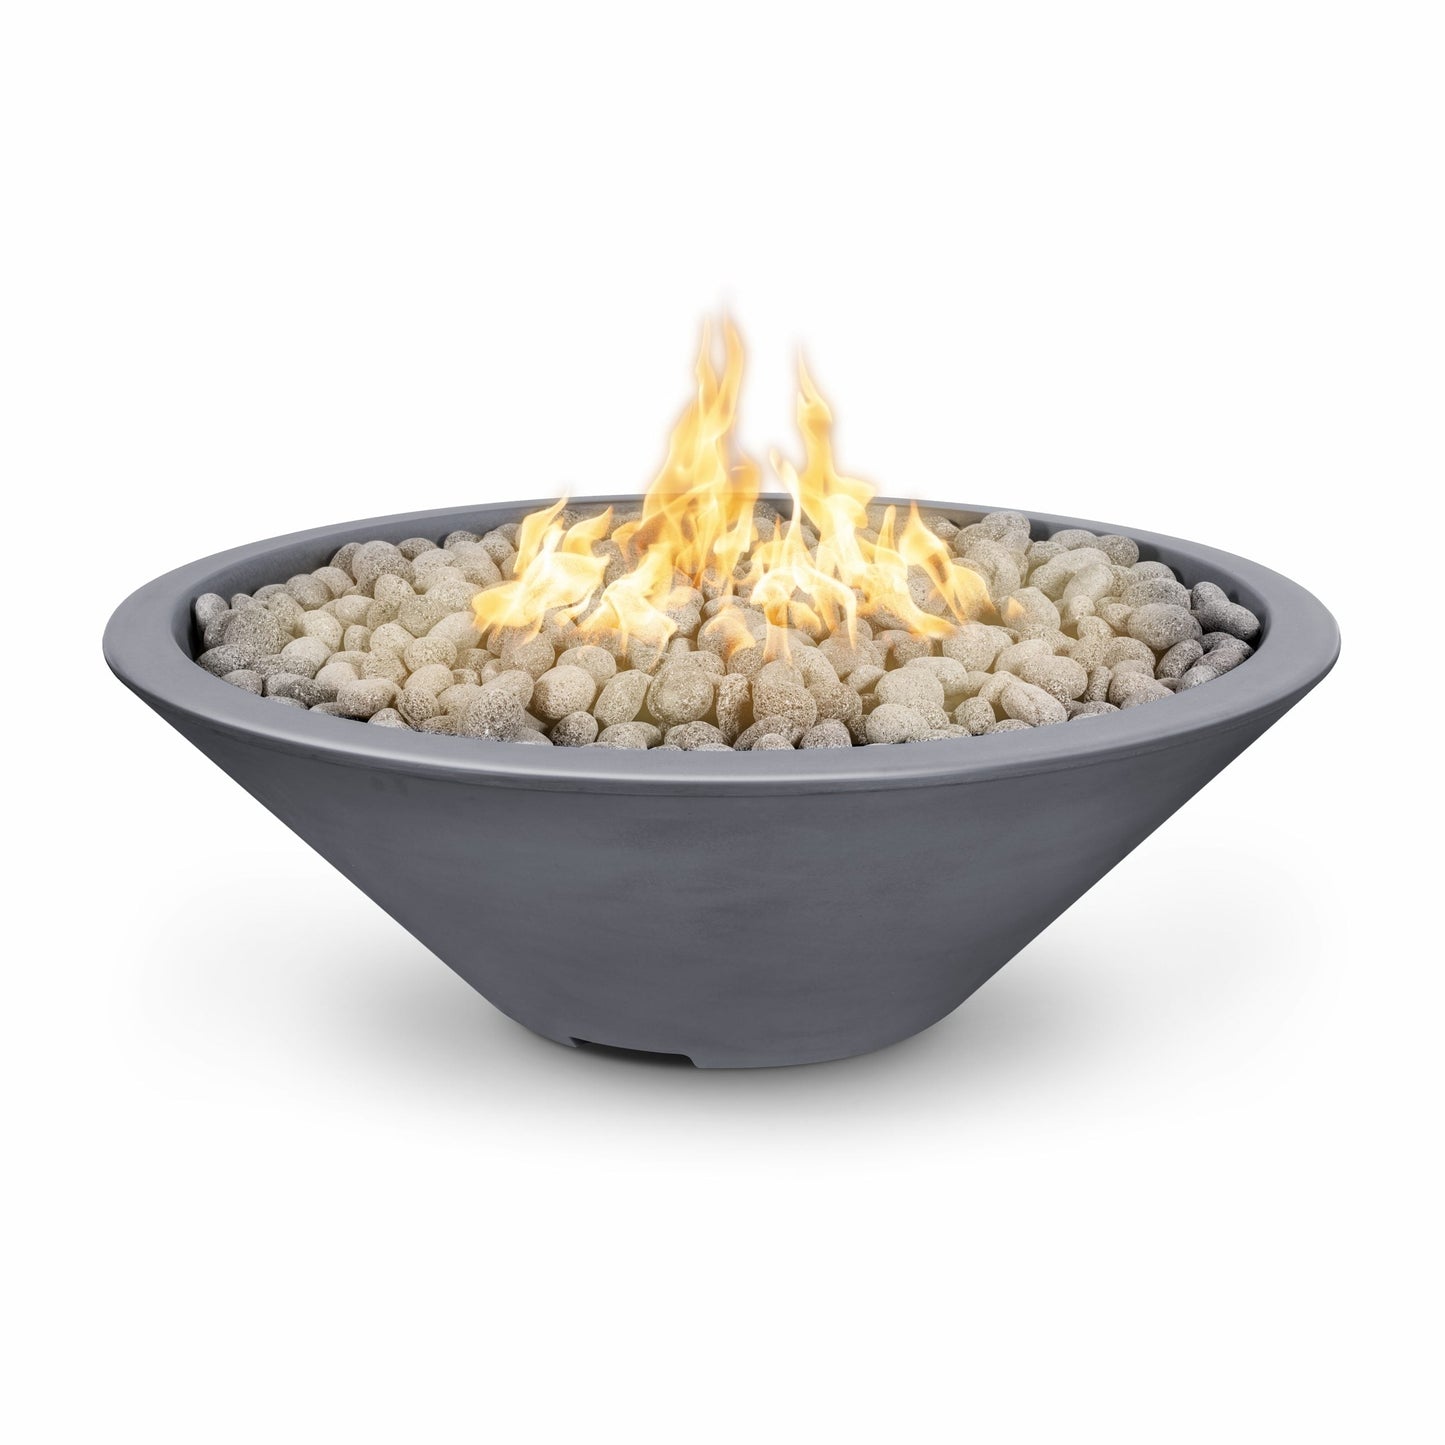 The Outdoor Plus Round Cazo 60" Black Powder Coated Metal Liquid Propane Fire Pit with 110V Electronic Ignition